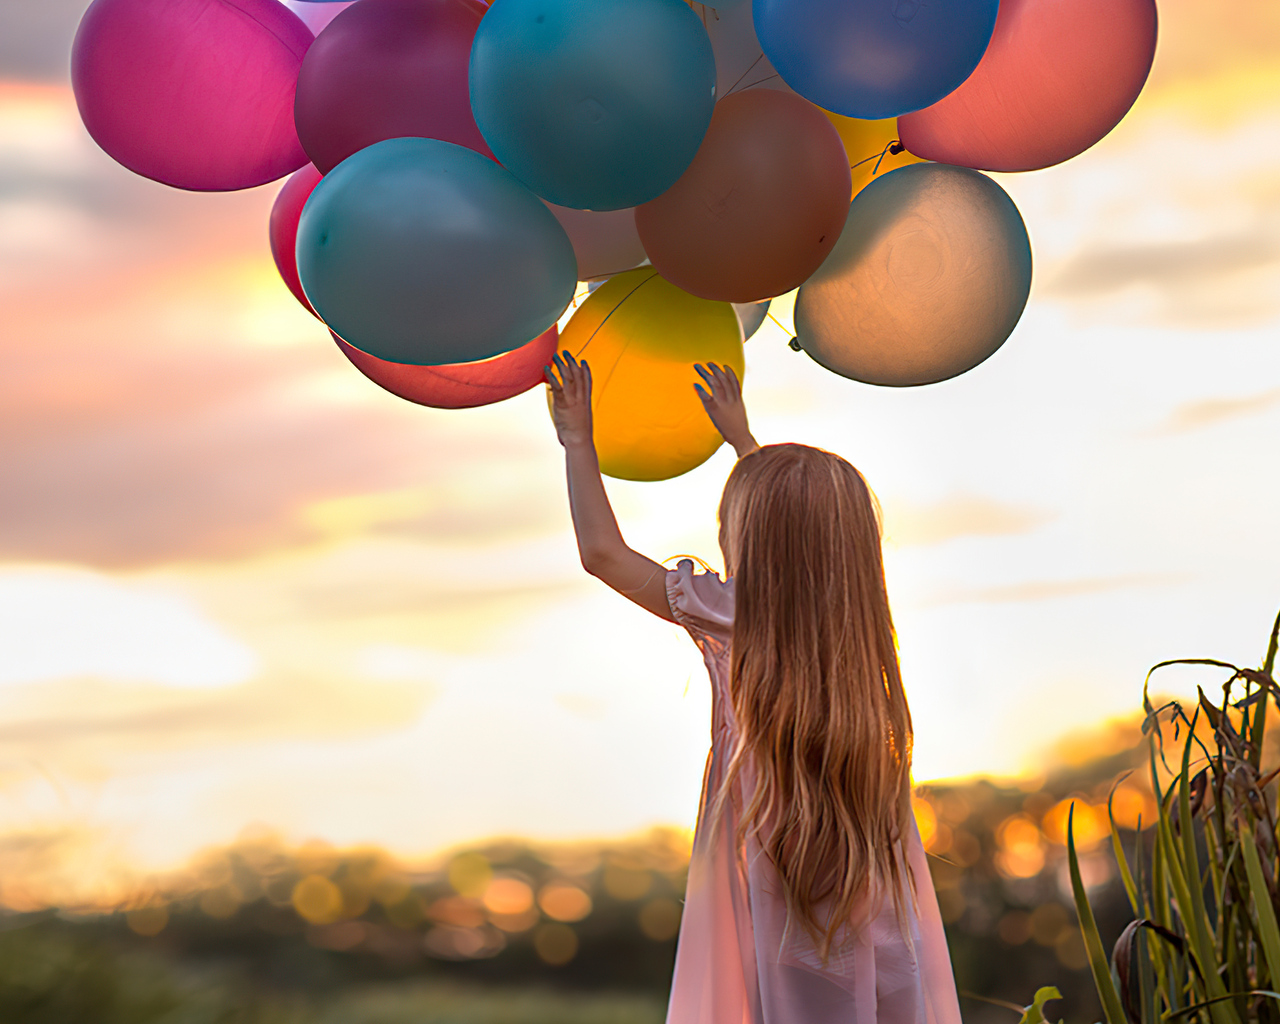 little-girl-with-colorful-balloons-tp.jpg